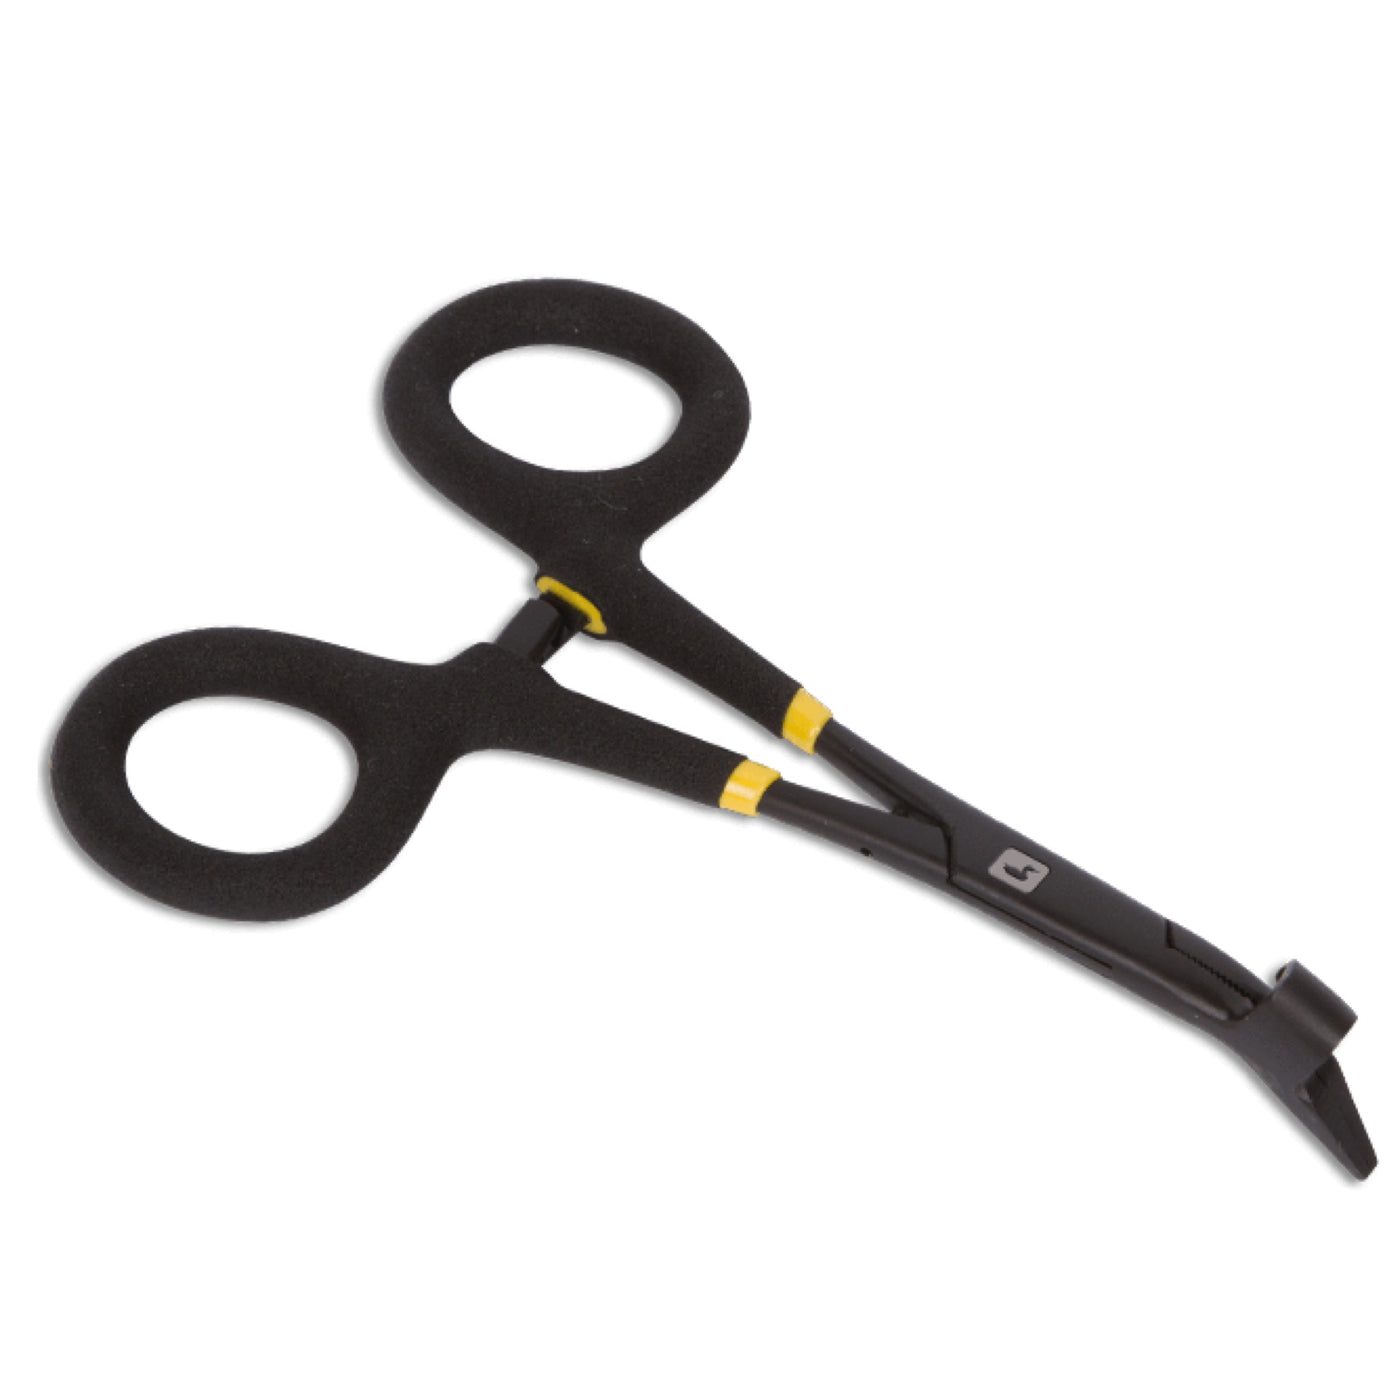 Vision Curved Micro Forceps Pliers